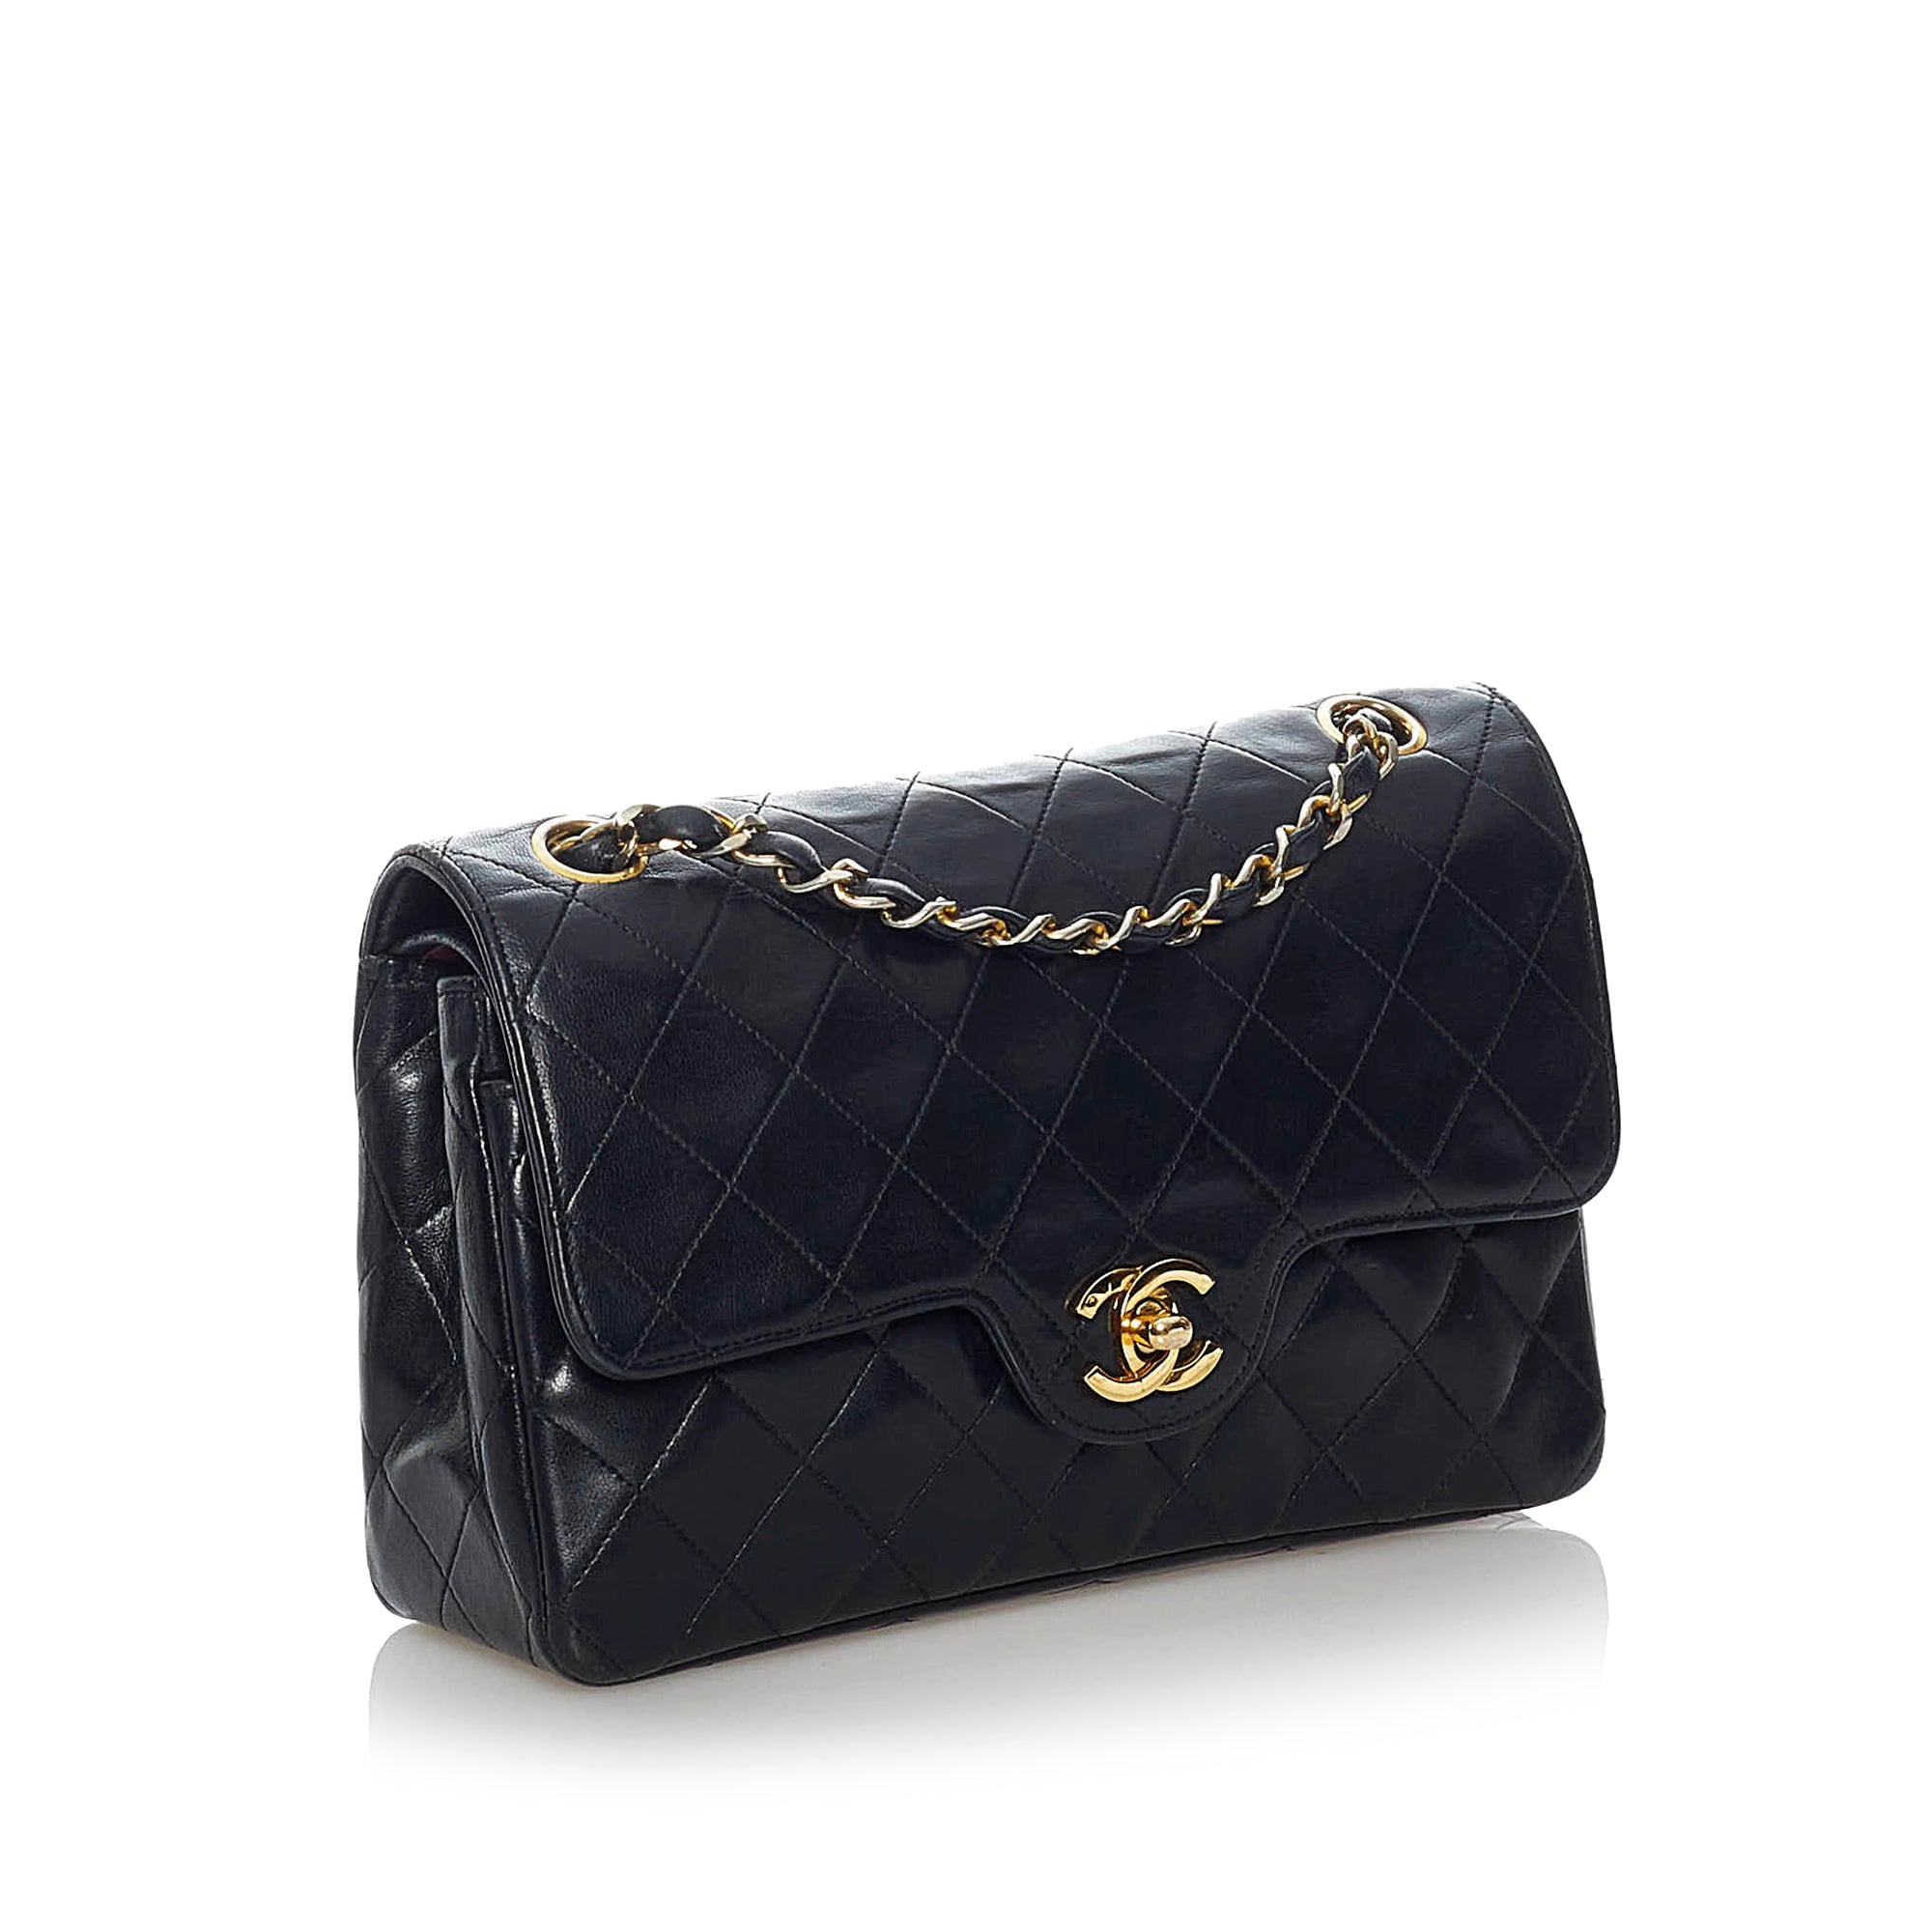 Black Chanel Medium Classic Lambskin Double Flap Shoulder Bag, For more affordable  Chanel products